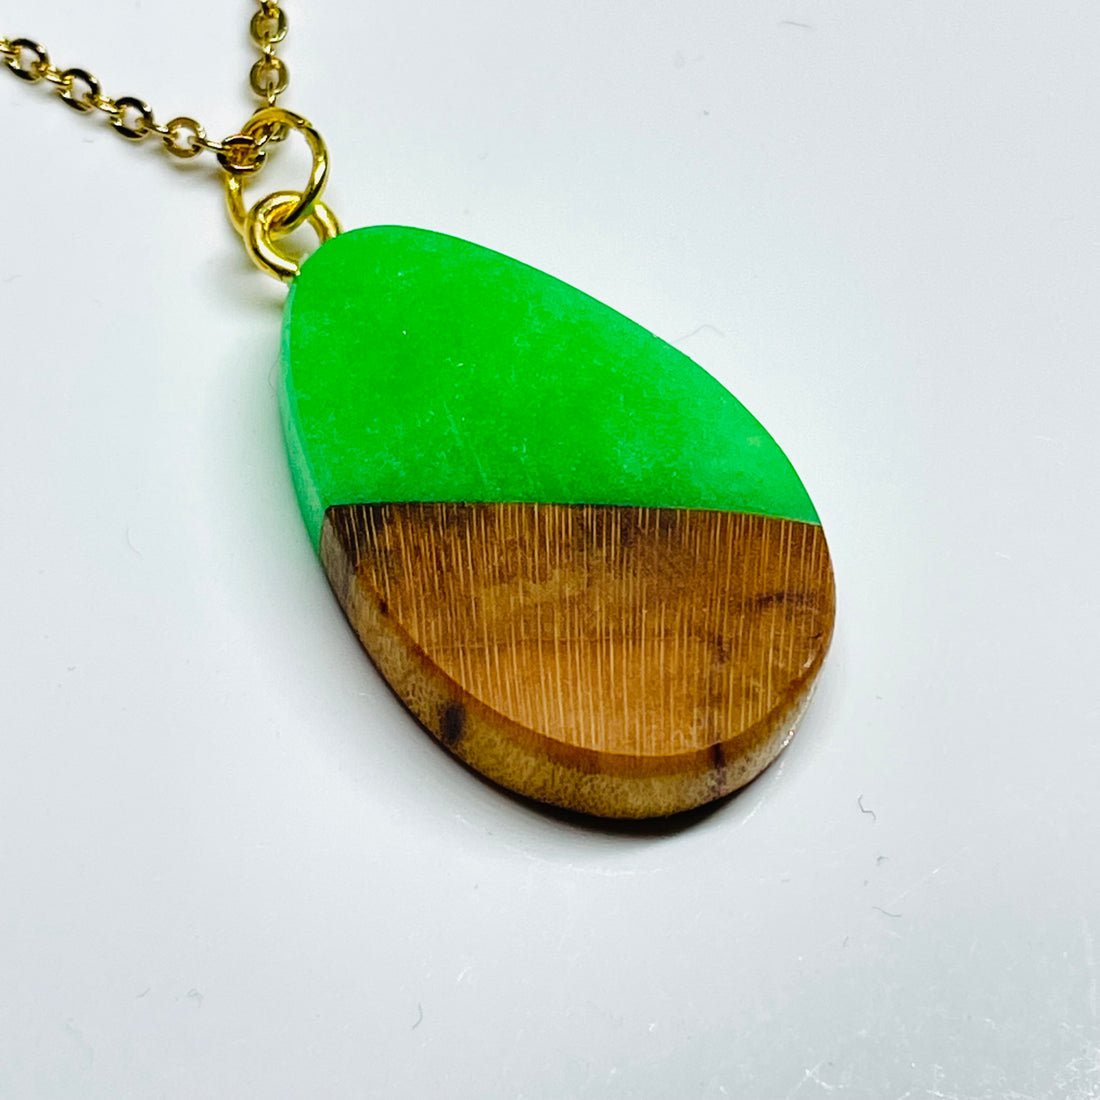 handmade jewelry, Minnesota local wood and resin artist. handmade white oak wood and green glow-in-the-dark resin pendant necklace, 9" stainless steel gold colored chain.